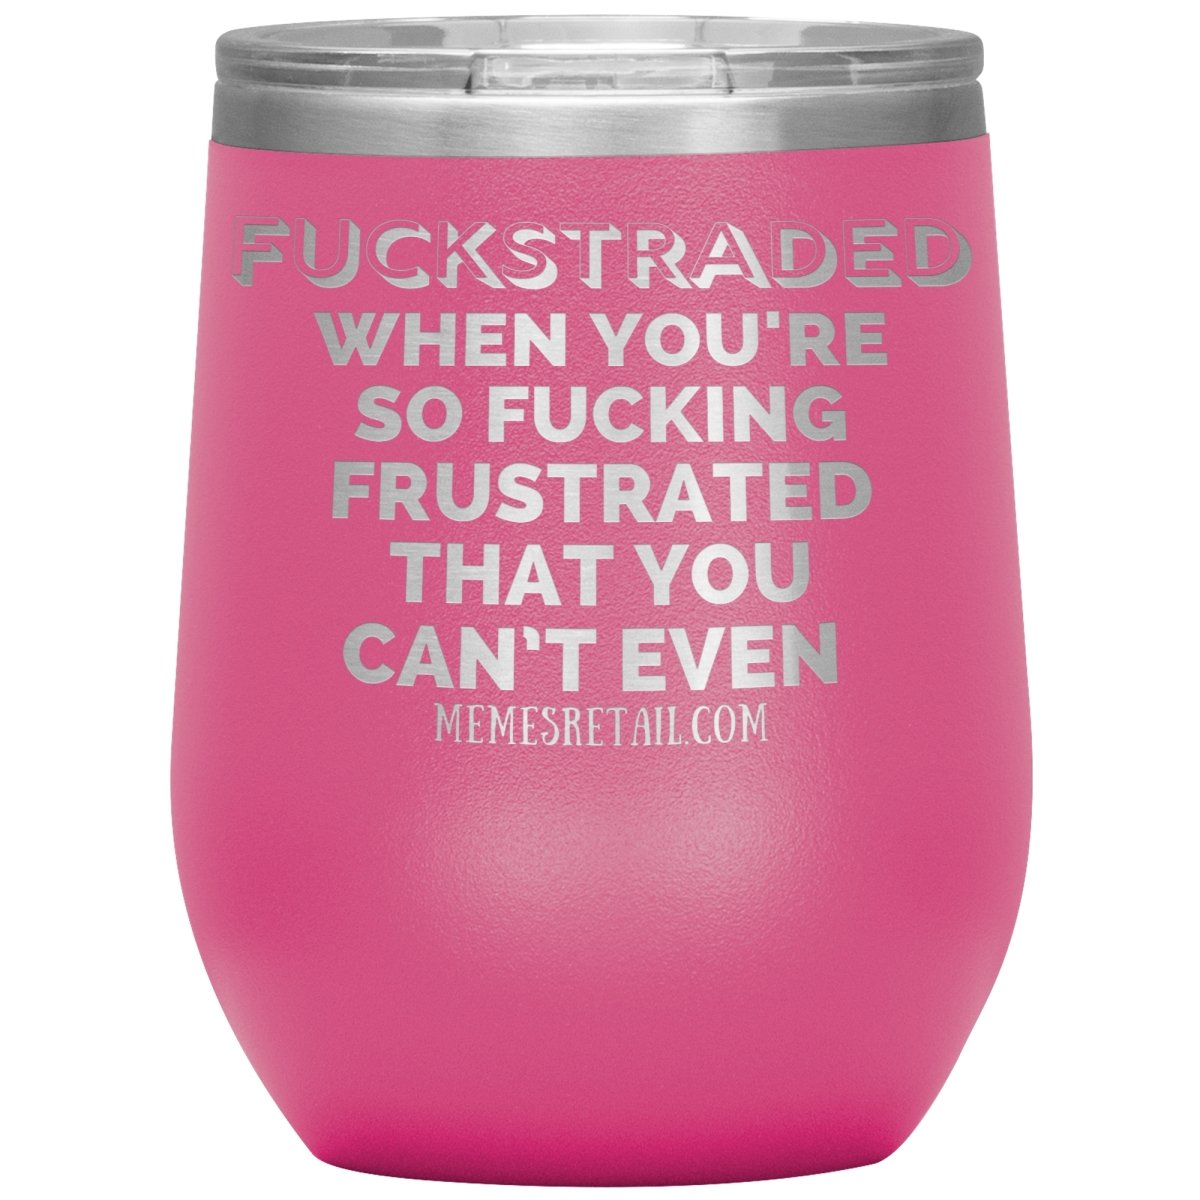 Fuckstraded, When You're So Fucking Frustrated That You Can’t Even Tumblers, 12oz Wine Insulated Tumbler / Pink - MemesRetail.com